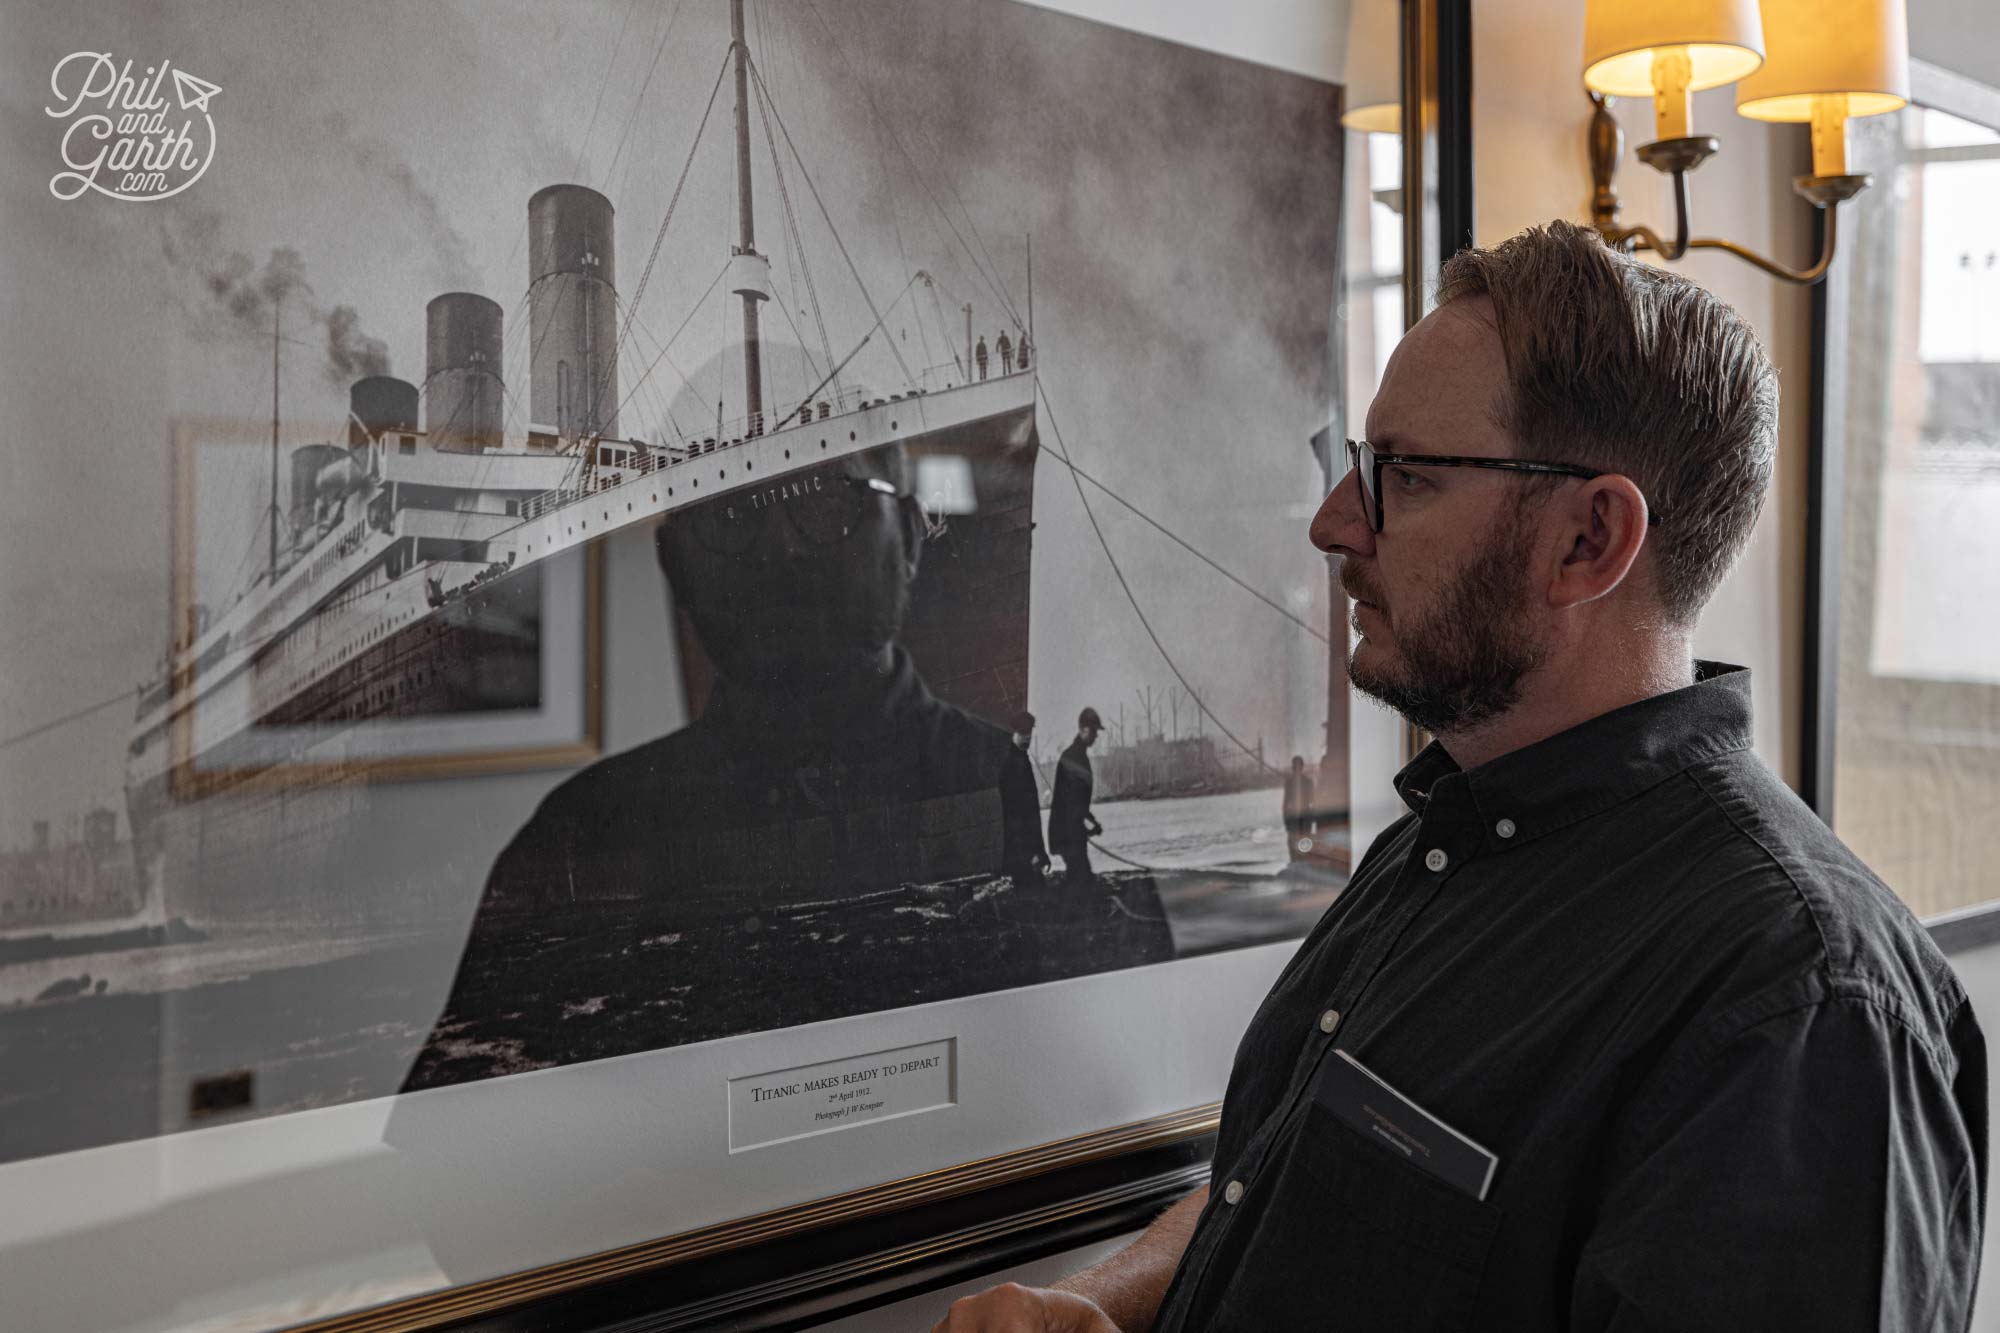 Garth checking out one of the many historic Titanic photographs